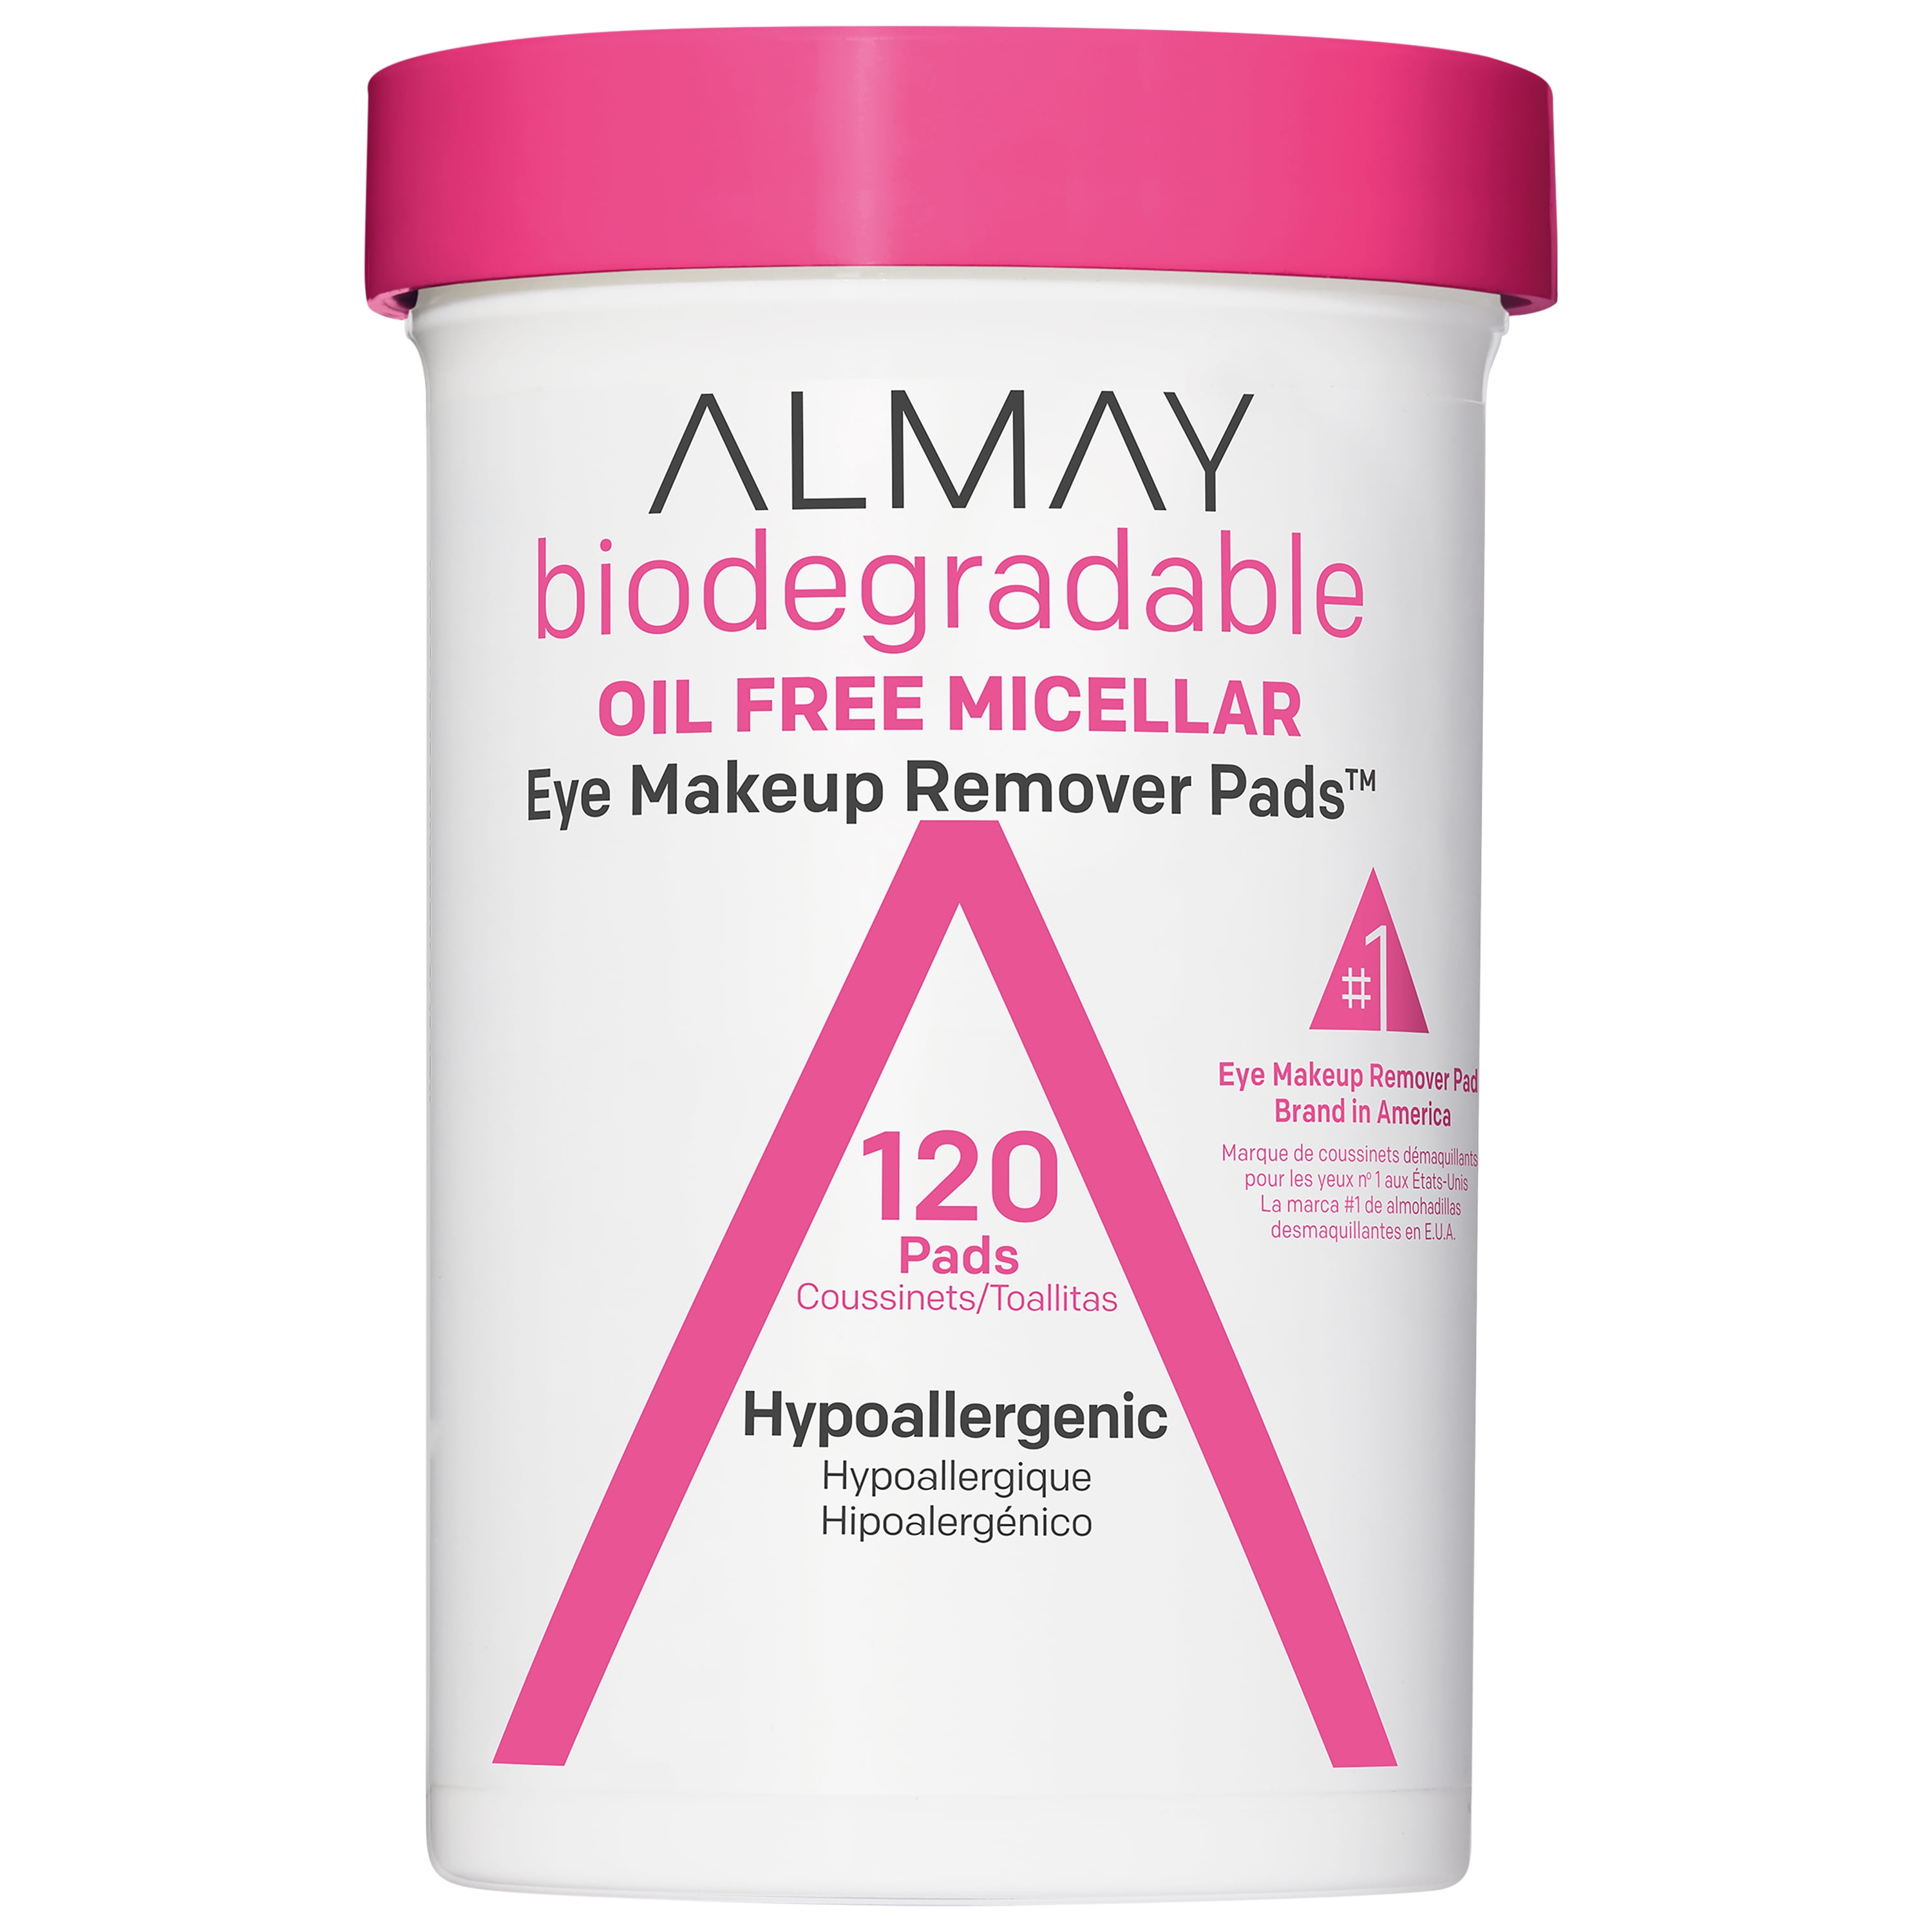 Almay Biodegradable Oil Free Micellar Eye Makeup Remover Pads, Hypoallergenic, Cruelty Free, Fragrance Free Cleansing Wipes, , 120 count